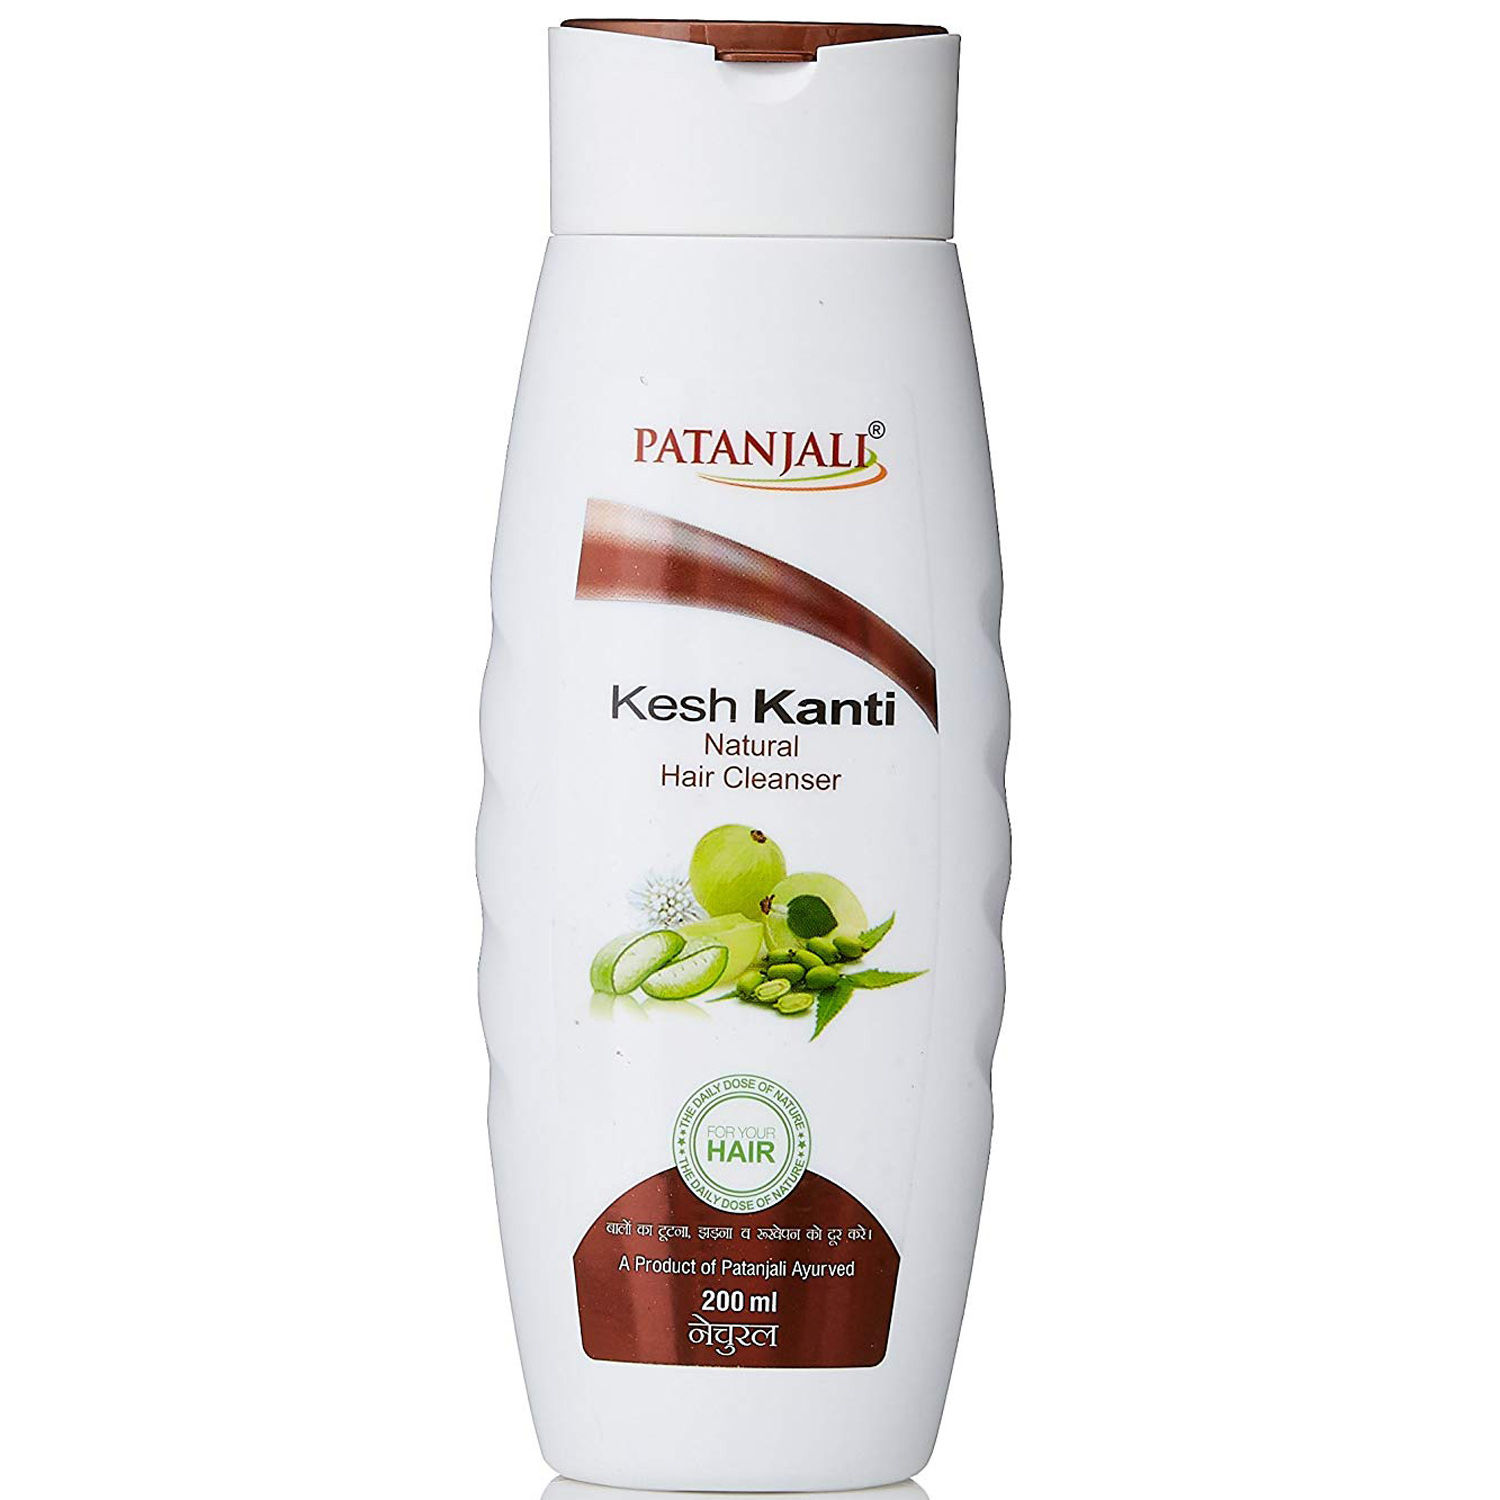 Patanjali Kesh Kanti Natural Hair Cleanser, 200 ml Price, Uses, Side  Effects, Composition - Apollo Pharmacy